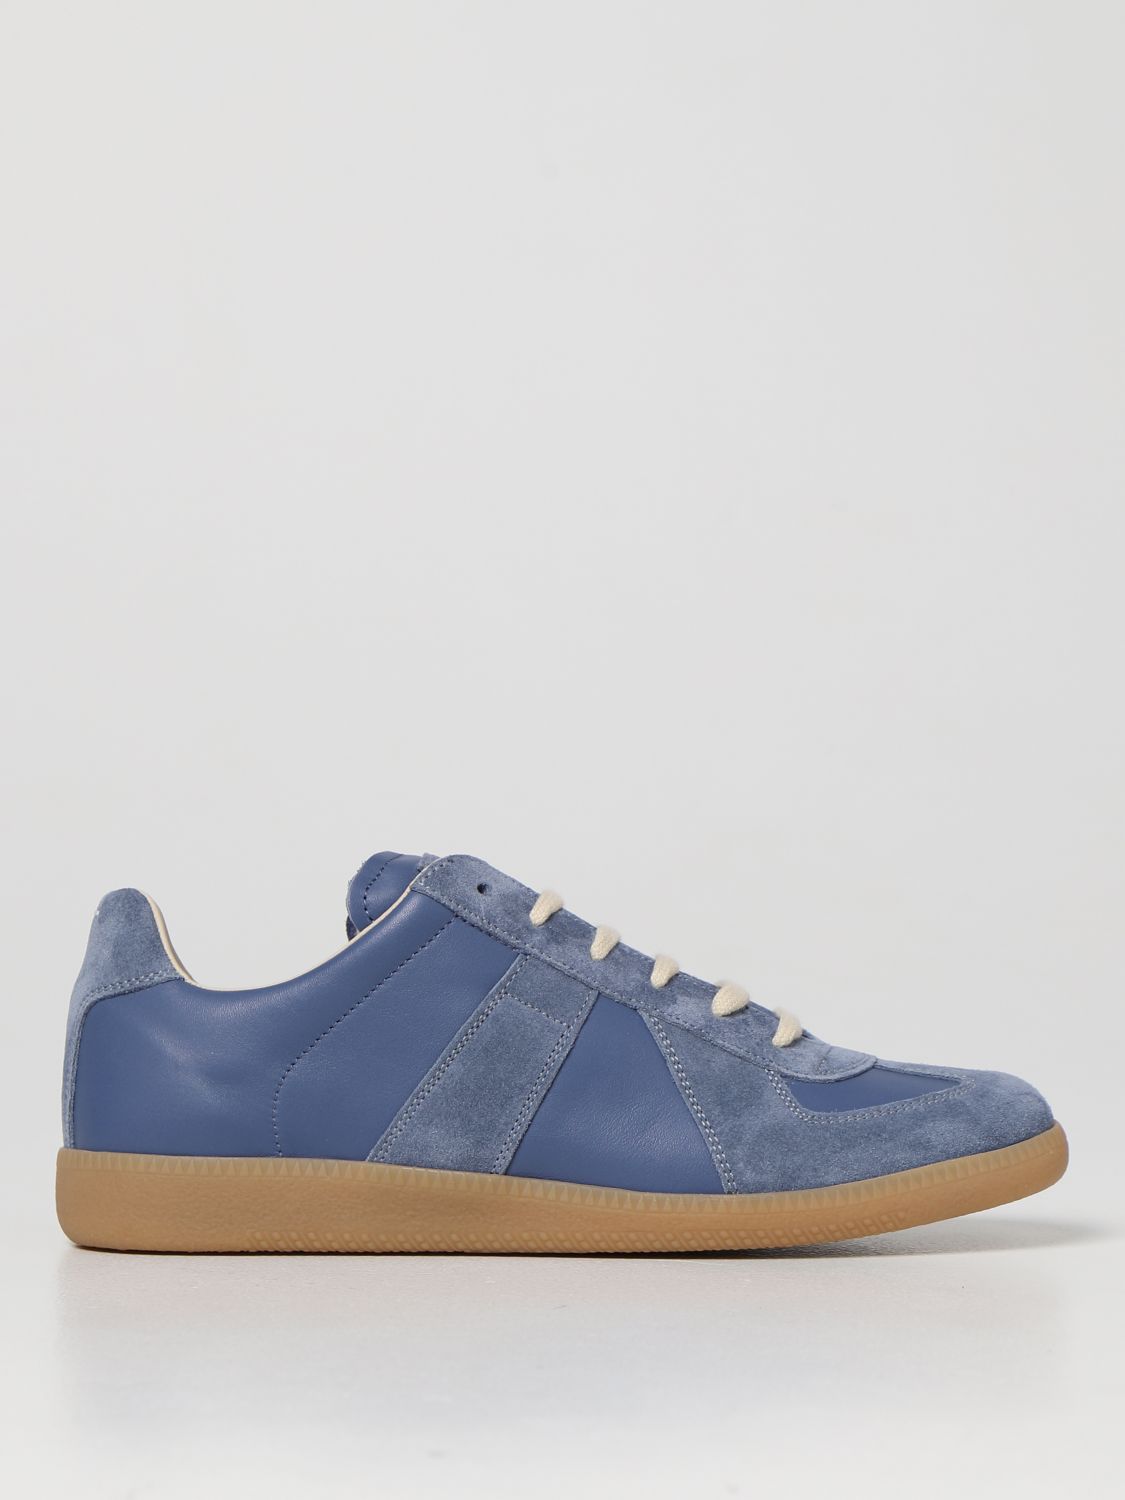 MAISON MARGIELA REPLICA SUEDE AND LEATHER SNEAKERS,C72325239